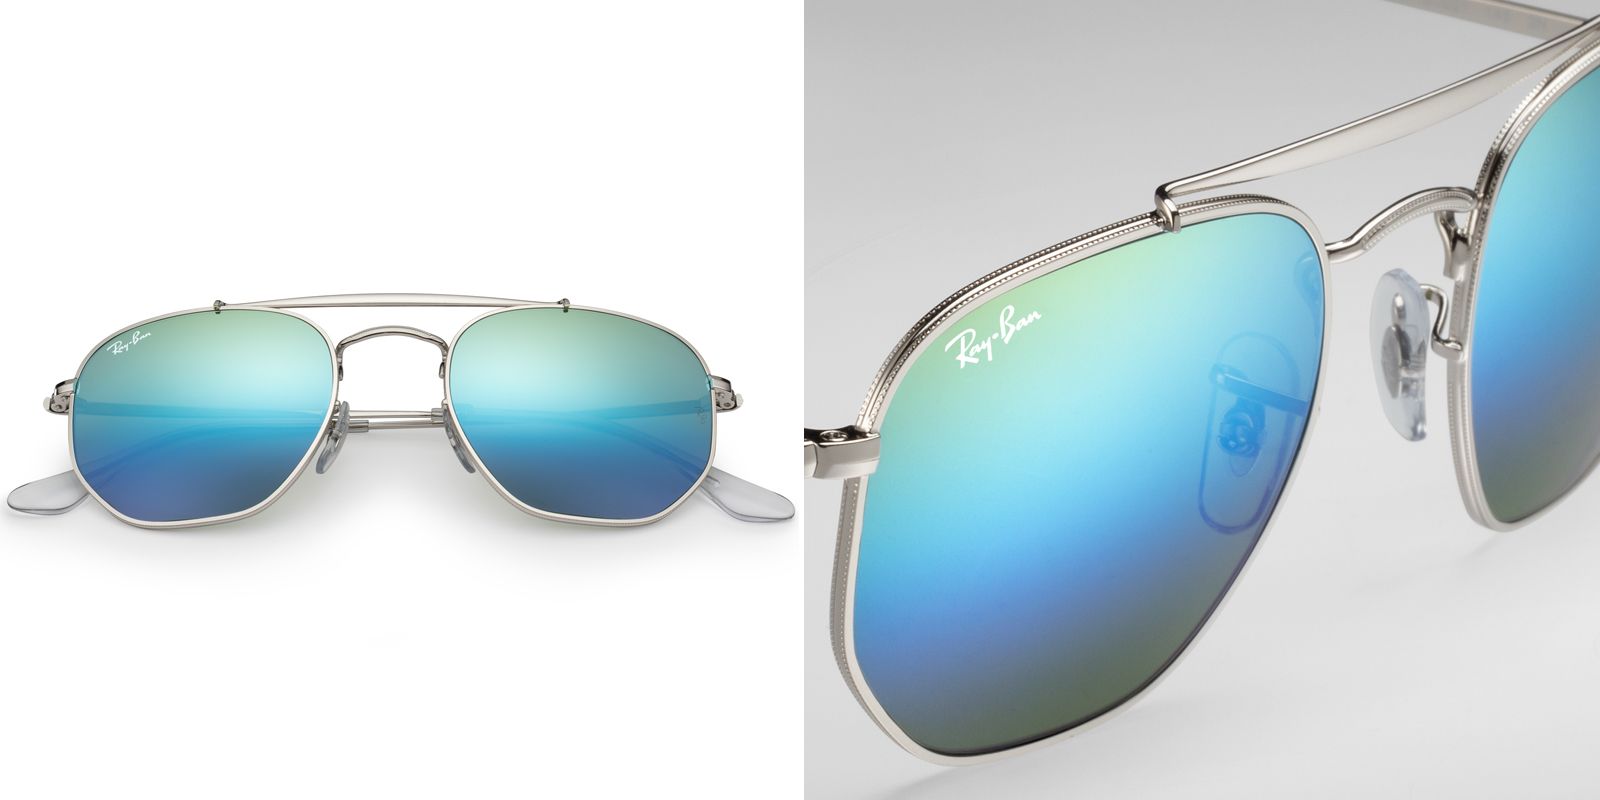 Ray-Ban Launches Marshal Sunglasses - Ray-Ban Launches New Sunglasses